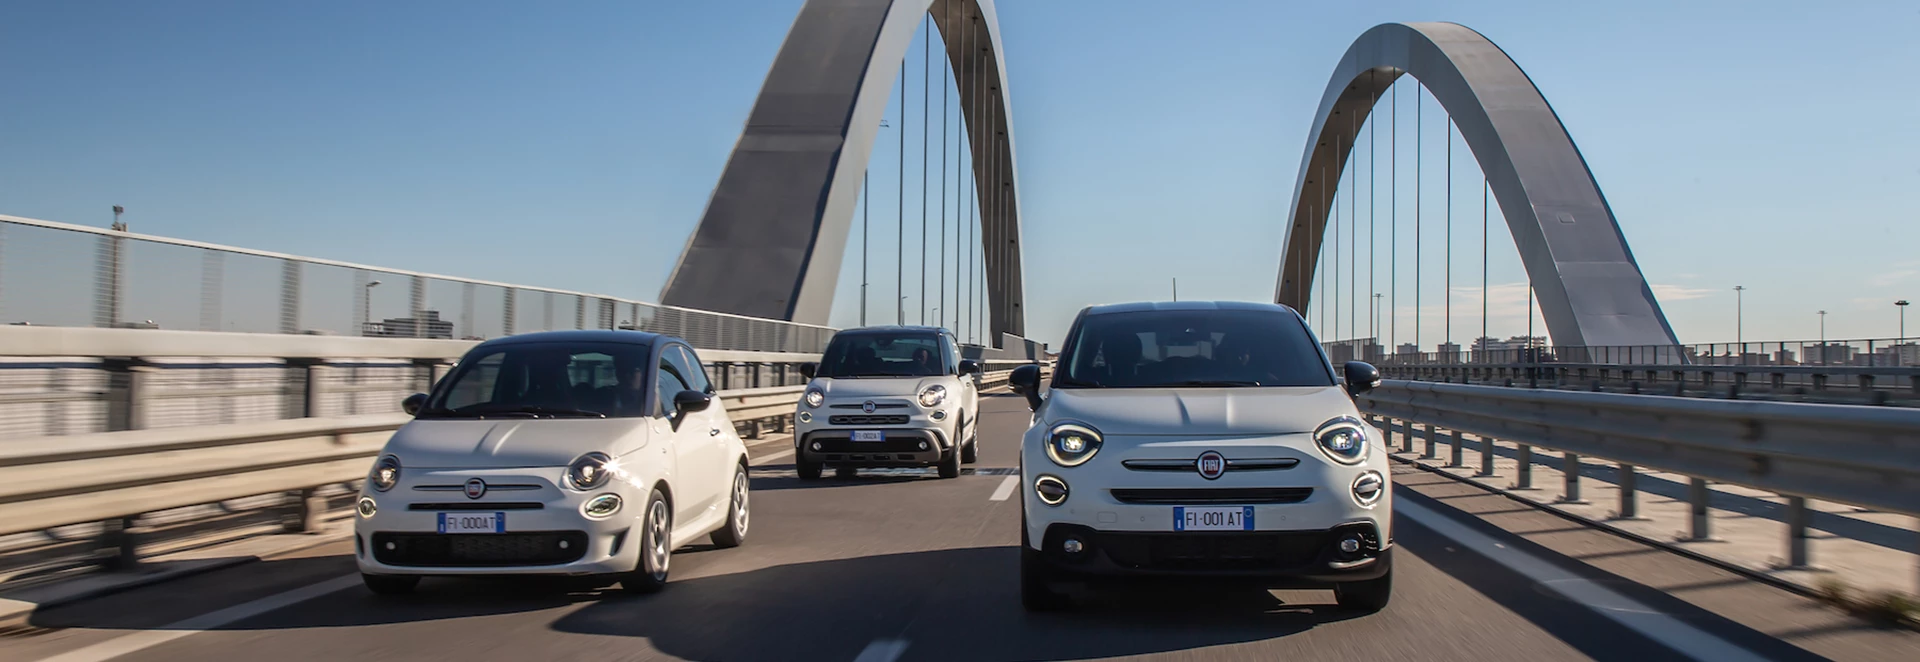 Fiat ‘Hey Google’ range: Here’s what you need to know 